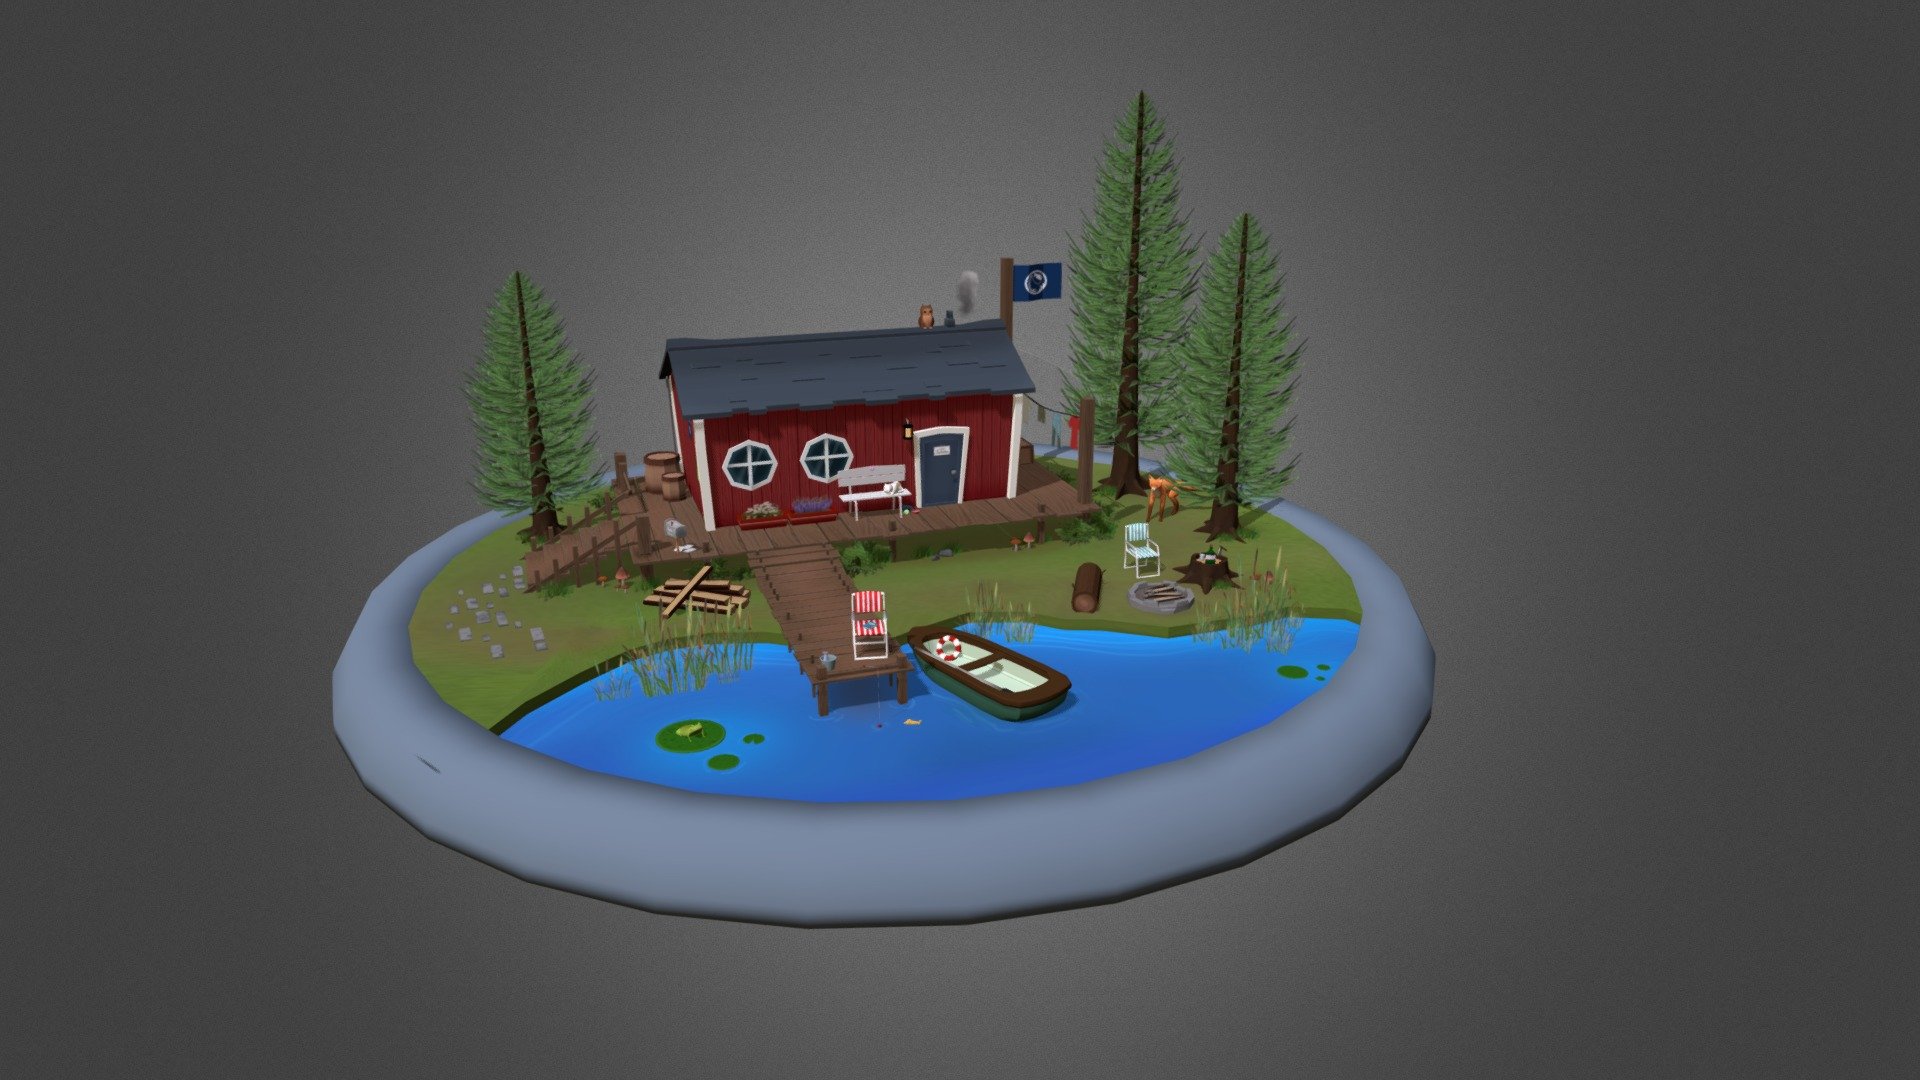 A small fisher's hut.
You can find more information about this piece on my blog:
https://lpprojects.tumblr.com/post/168467961853/via-diorama-test-by-lara-paul-3d-model-this - Diorama "Fisher's Hut" - 3D model by Lara Paul (@lpprojects) 3d model